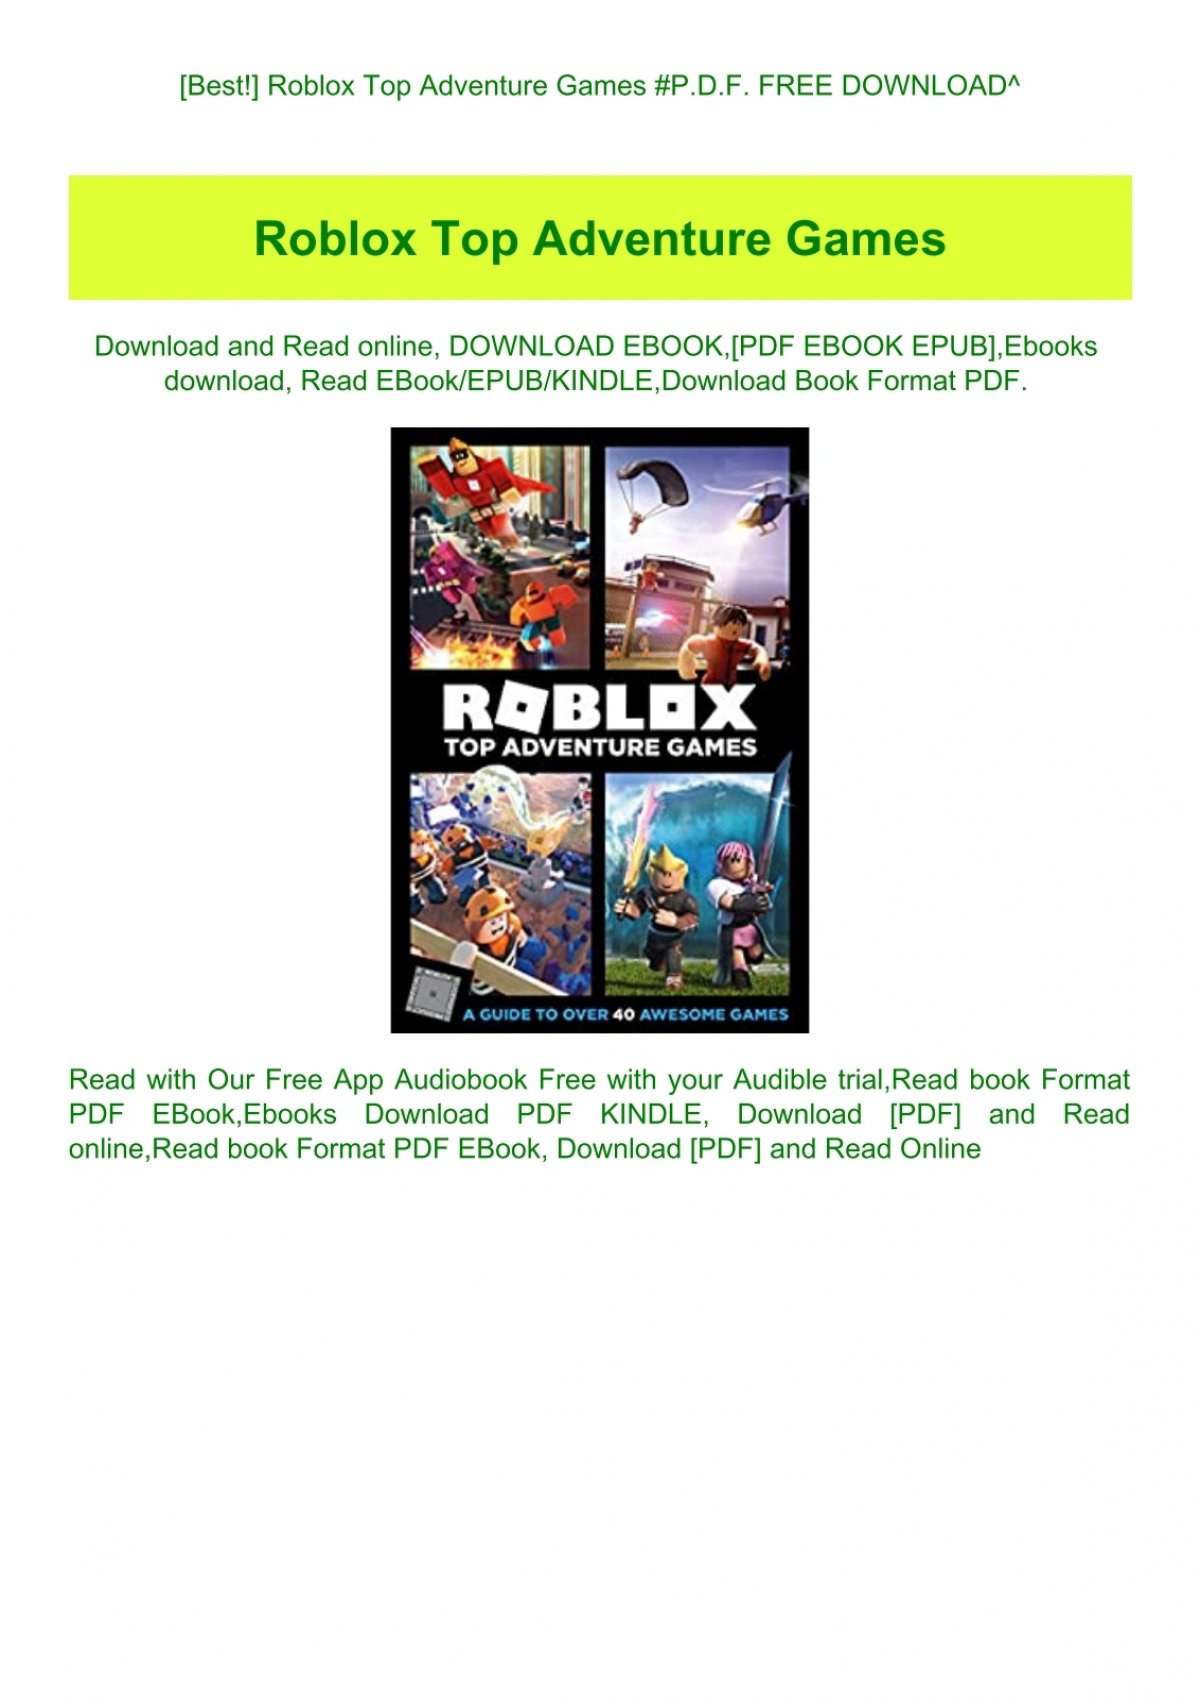 Best Roblox Top Adventure Games P D F Free Download - download roblox free on kindle